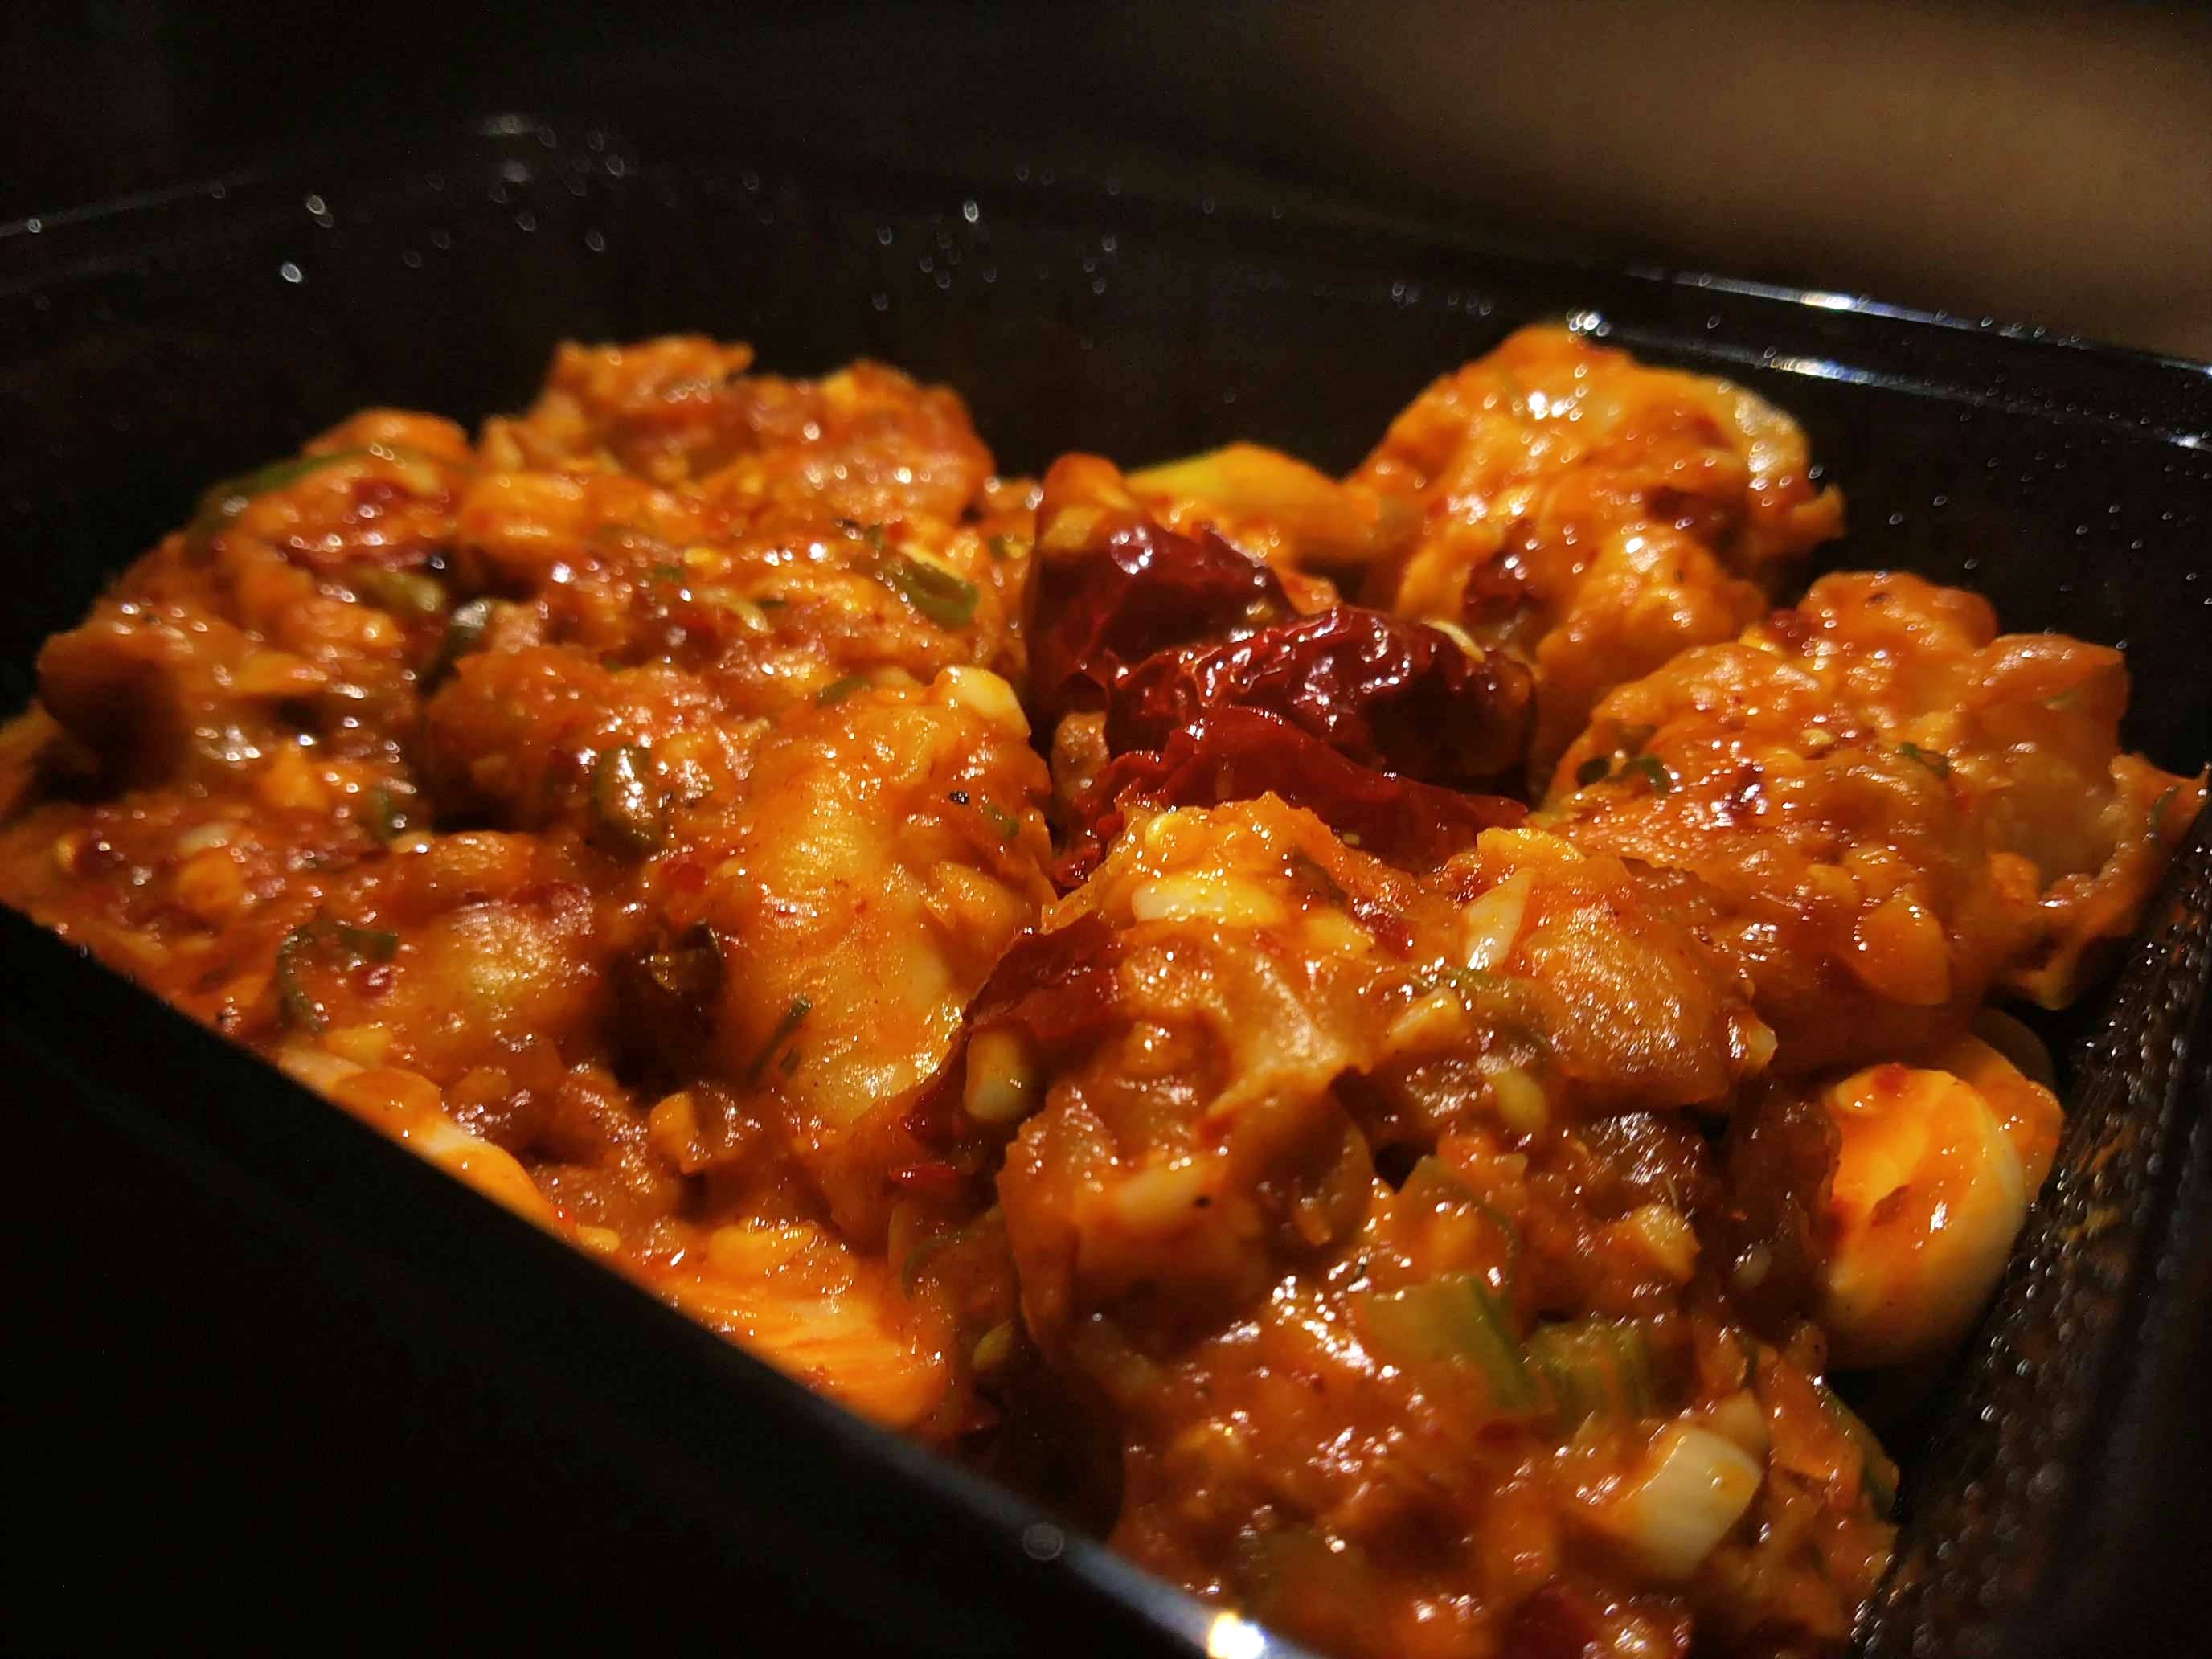 Dish,Cuisine,Food,Ingredient,Meat,Orange chicken,Produce,Curry,General tso's chicken,Recipe